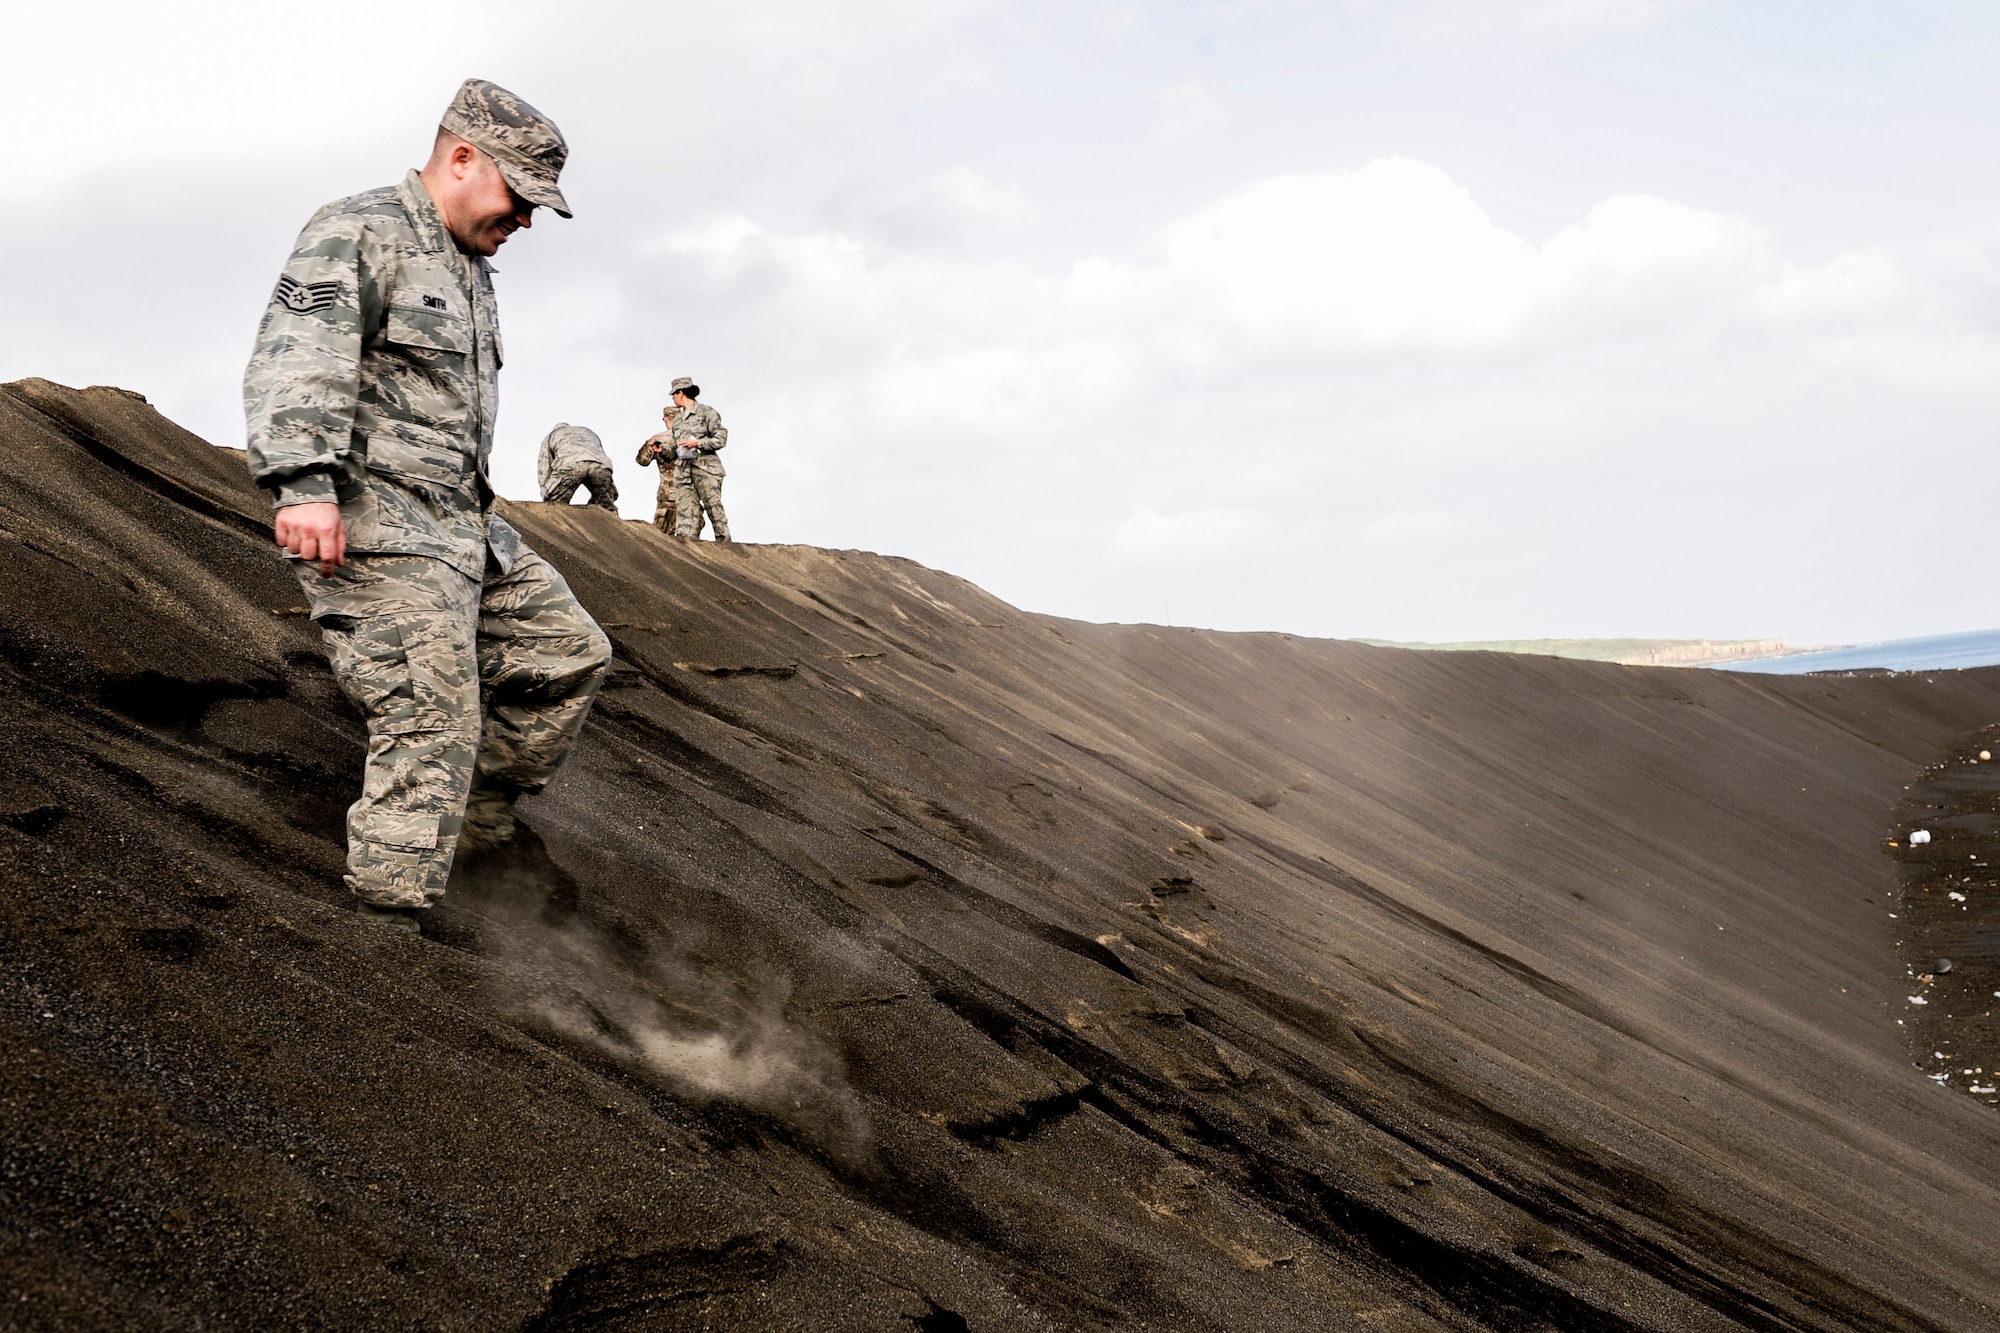 U.S. Air Force Staff Sgt. Corey Smith, 733rd Air Mobility Squadron air fright supervisor, treads down a slope of sand toward the coast Jan. 8, 2015 on Iwo To, Japan. Members of Kadena Air Base, Japan, gathered handfuls of sand to serve as a reminder of the battle of Iwo Jima, which had taken place on the island nearly 70 years ago. (U.S. Air Force photo by Airman 1st Class John Linzmeier)